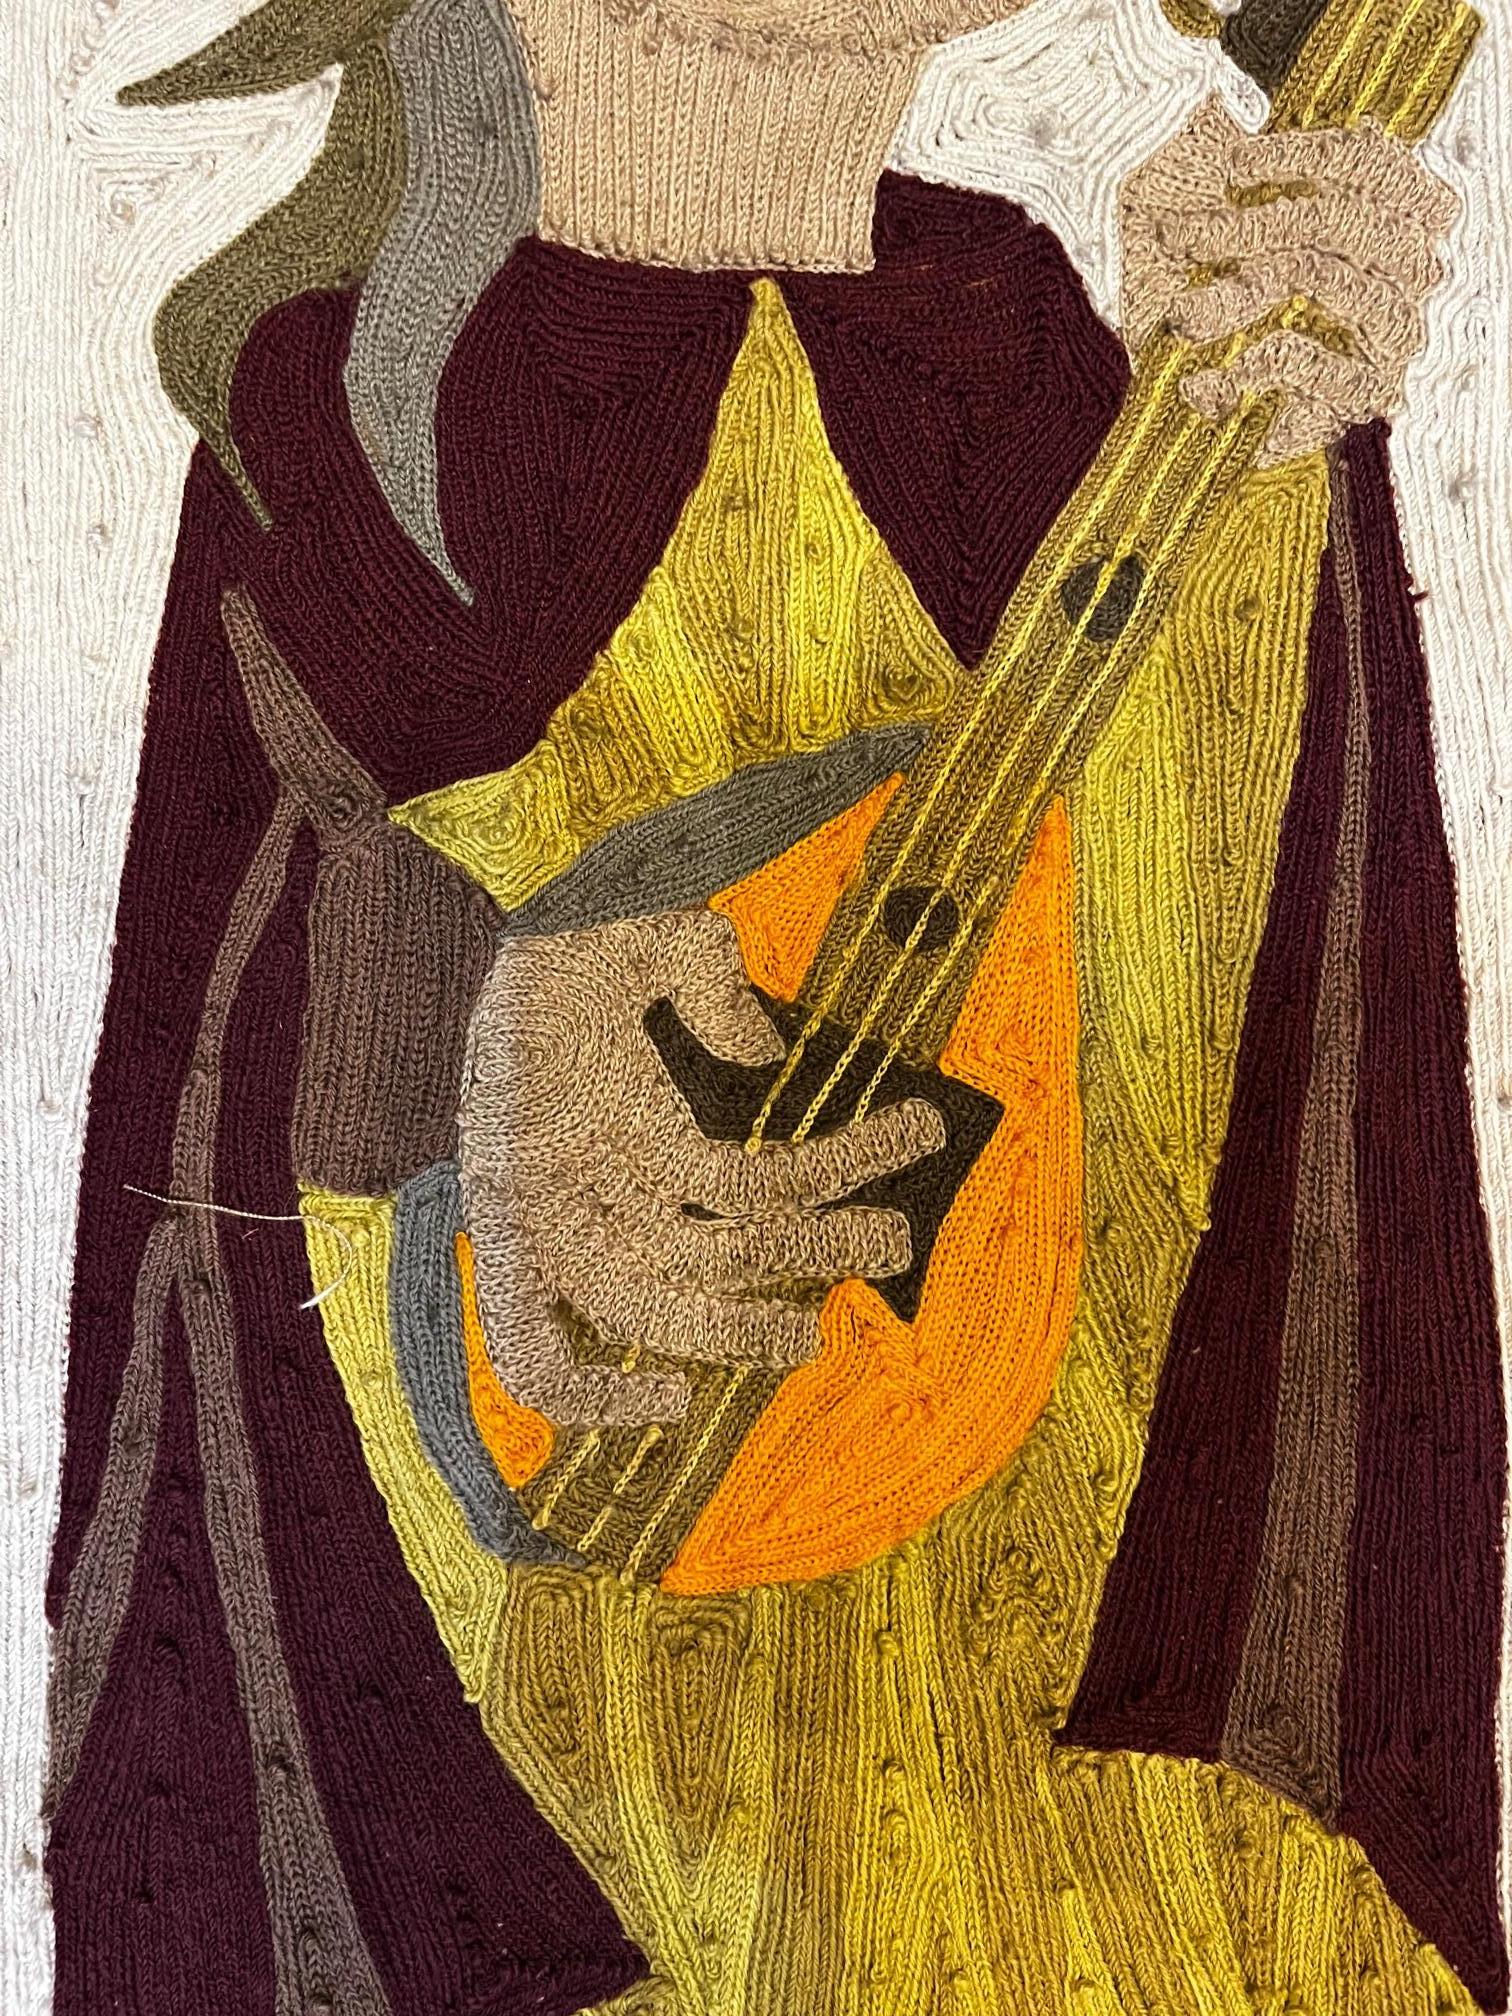 the lute player painting